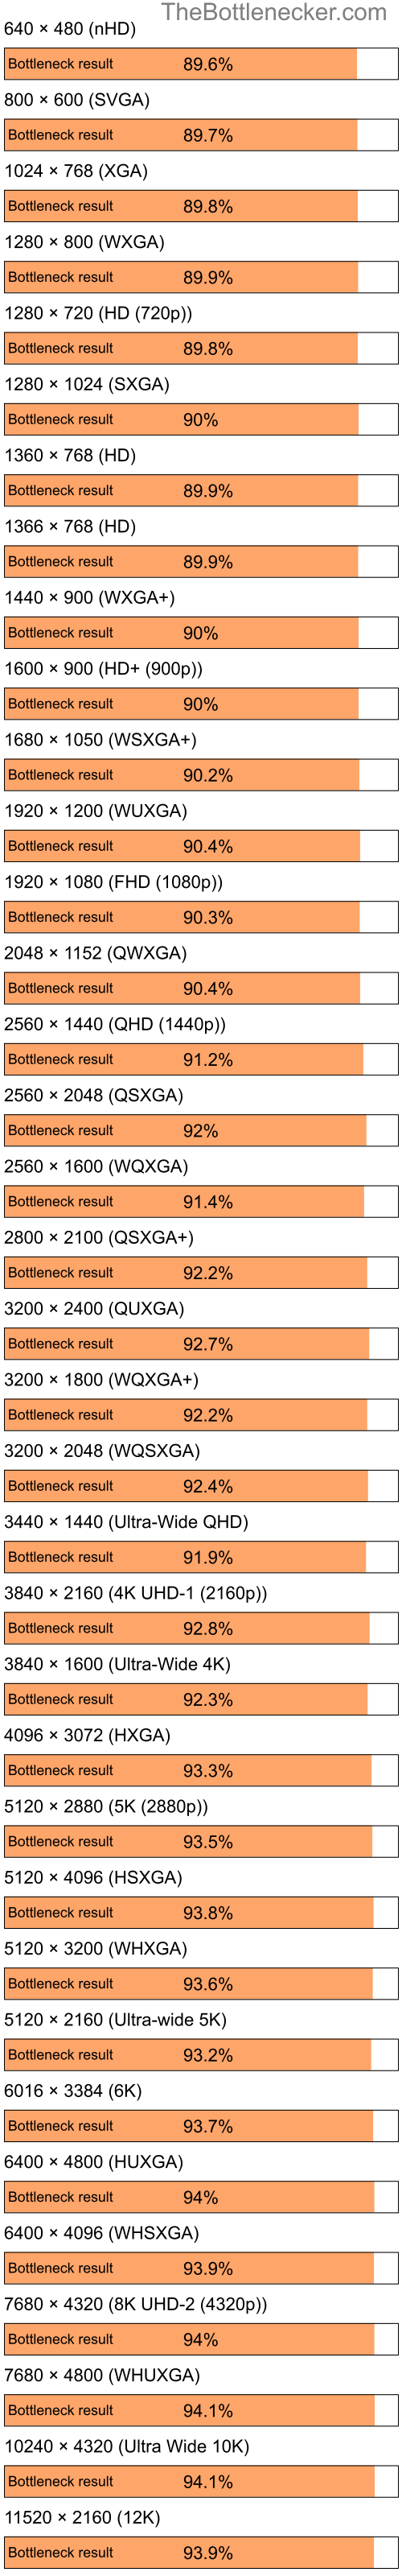 Bottleneck results by resolution for Intel Celeron M and NVIDIA GeForce3 Ti 200 in General Tasks